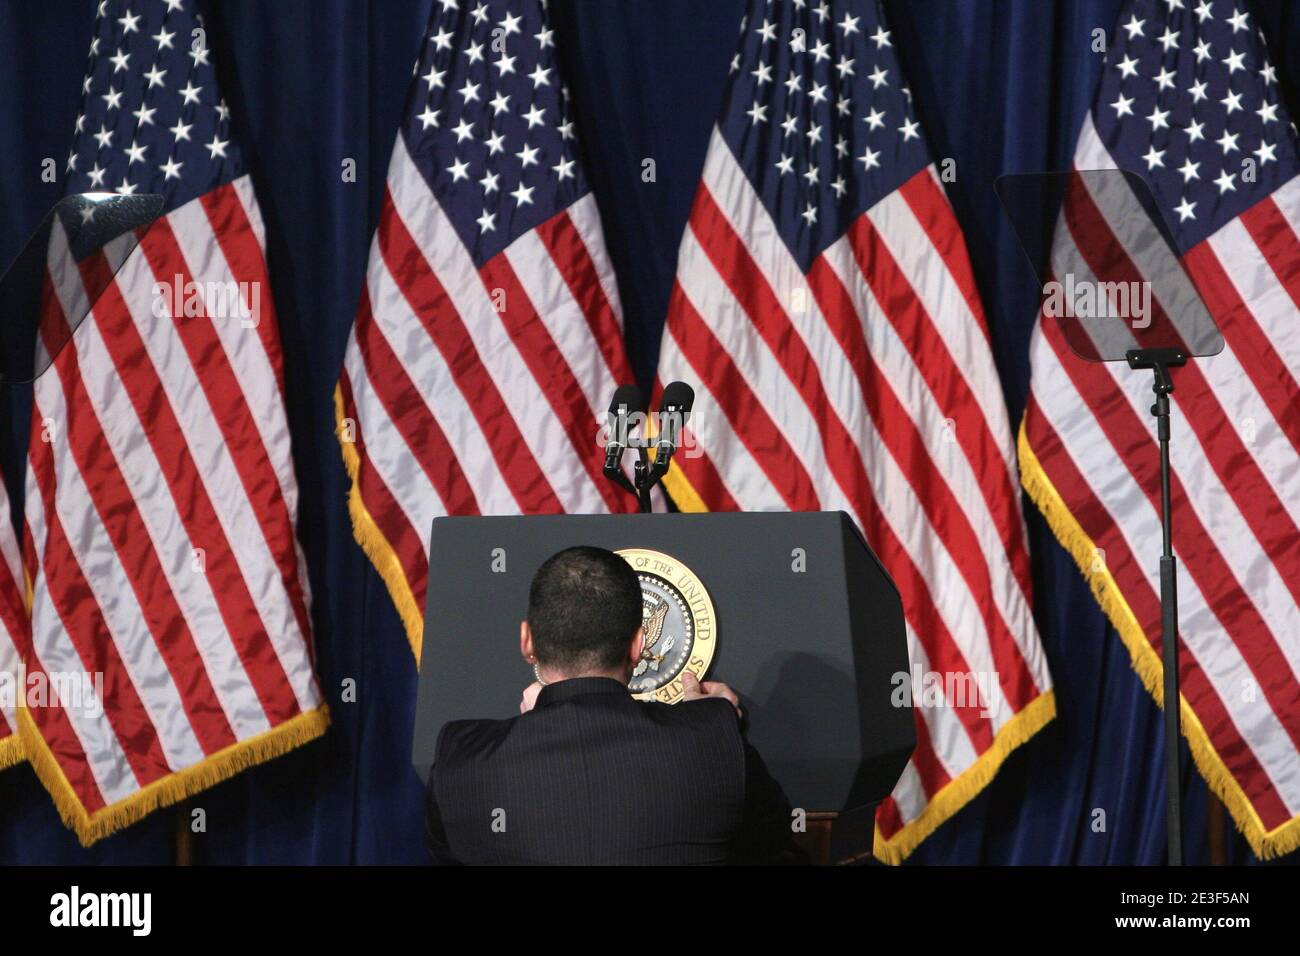 The Presidential Seal is applied to the podium before President Obama's arrival at the Dobson High school in Mesa, AZ, USA on February 18, 2009. Photo by Alexandra Buxbaum/ABACAPRESS.COM Stock Photo